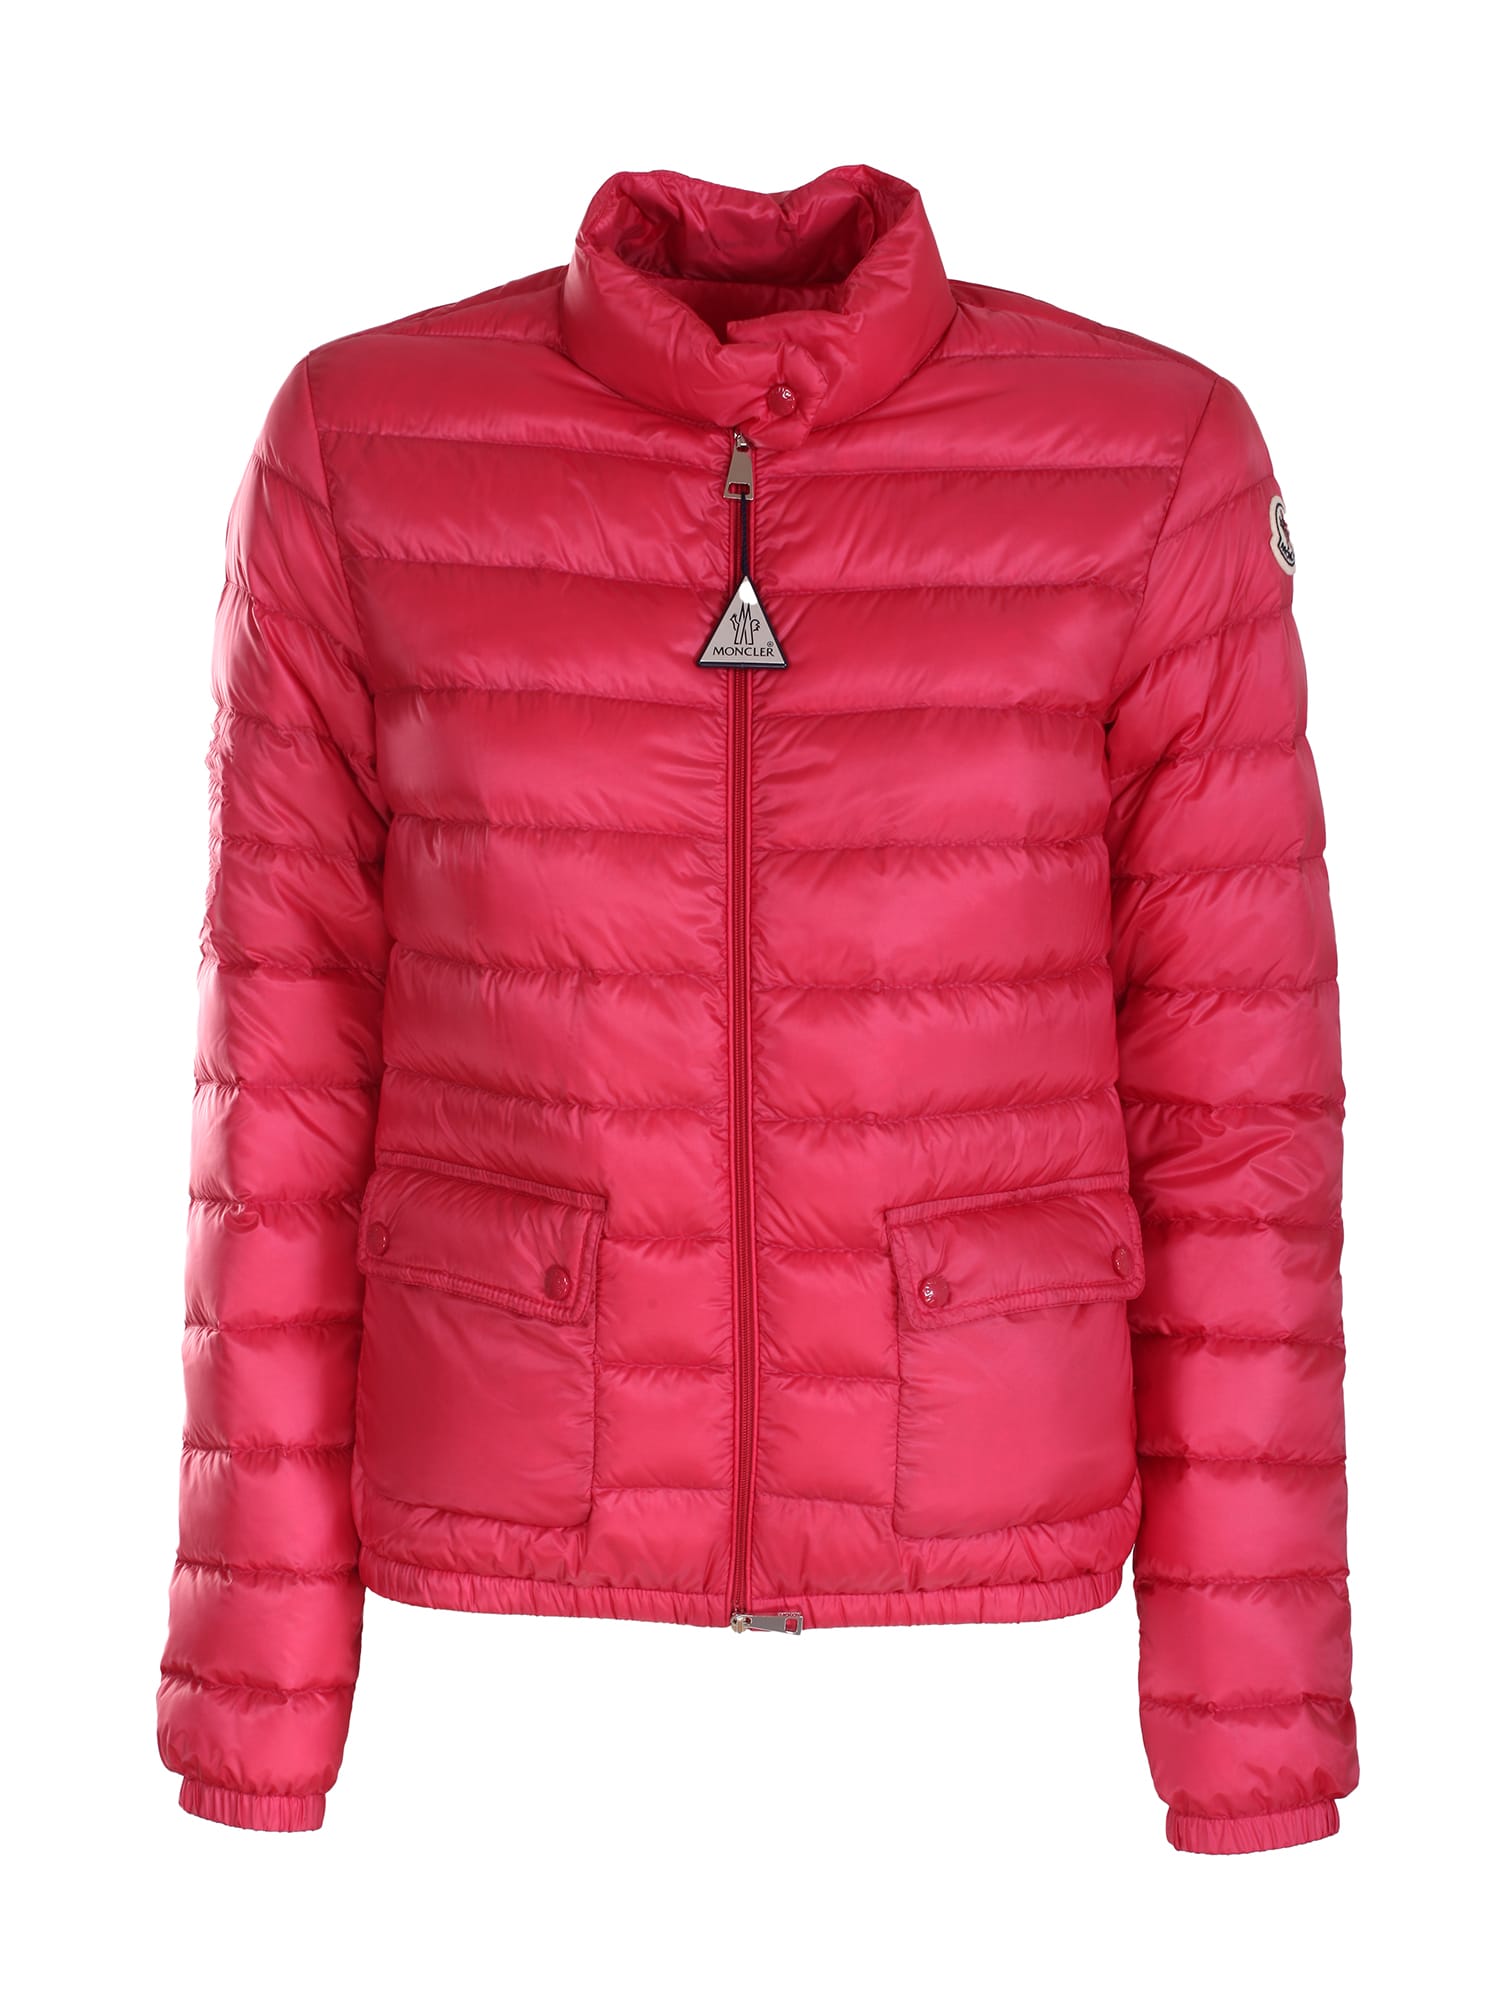 Women's MONCLER Jackets On Sale, Up To 70% Off | ModeSens